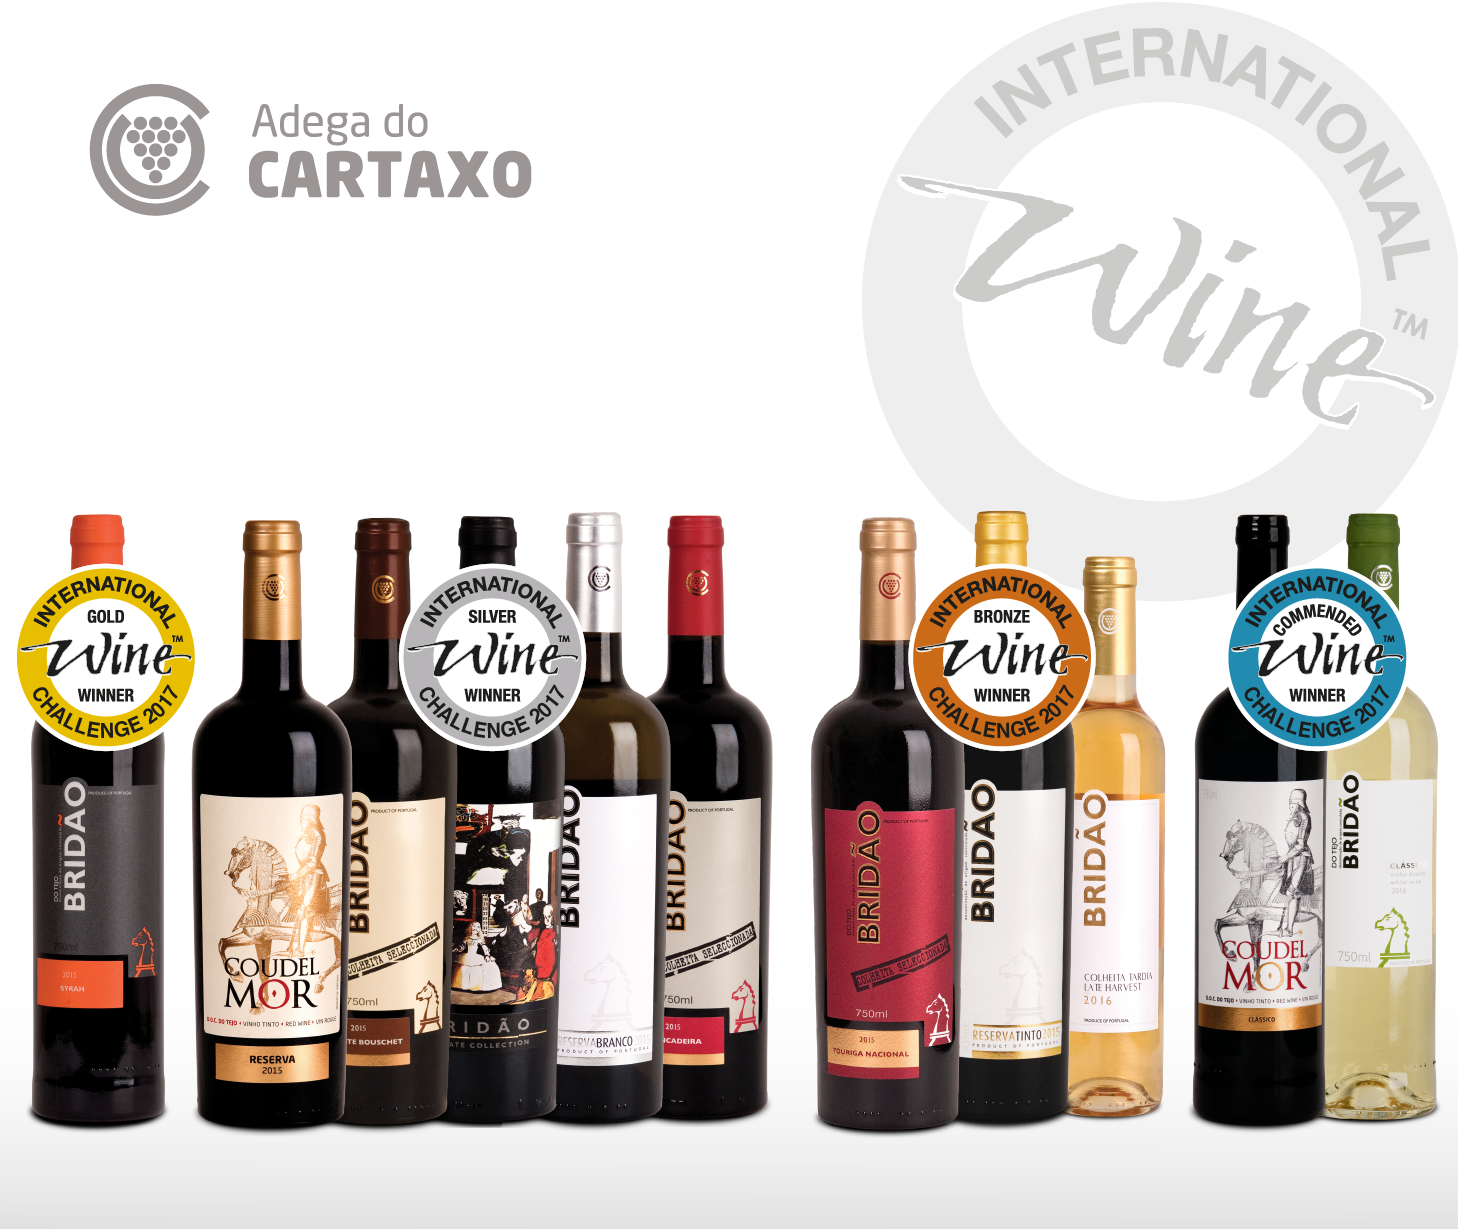 Adega do Cartaxo conquers 11 medals at the International Wine Challenge Contest